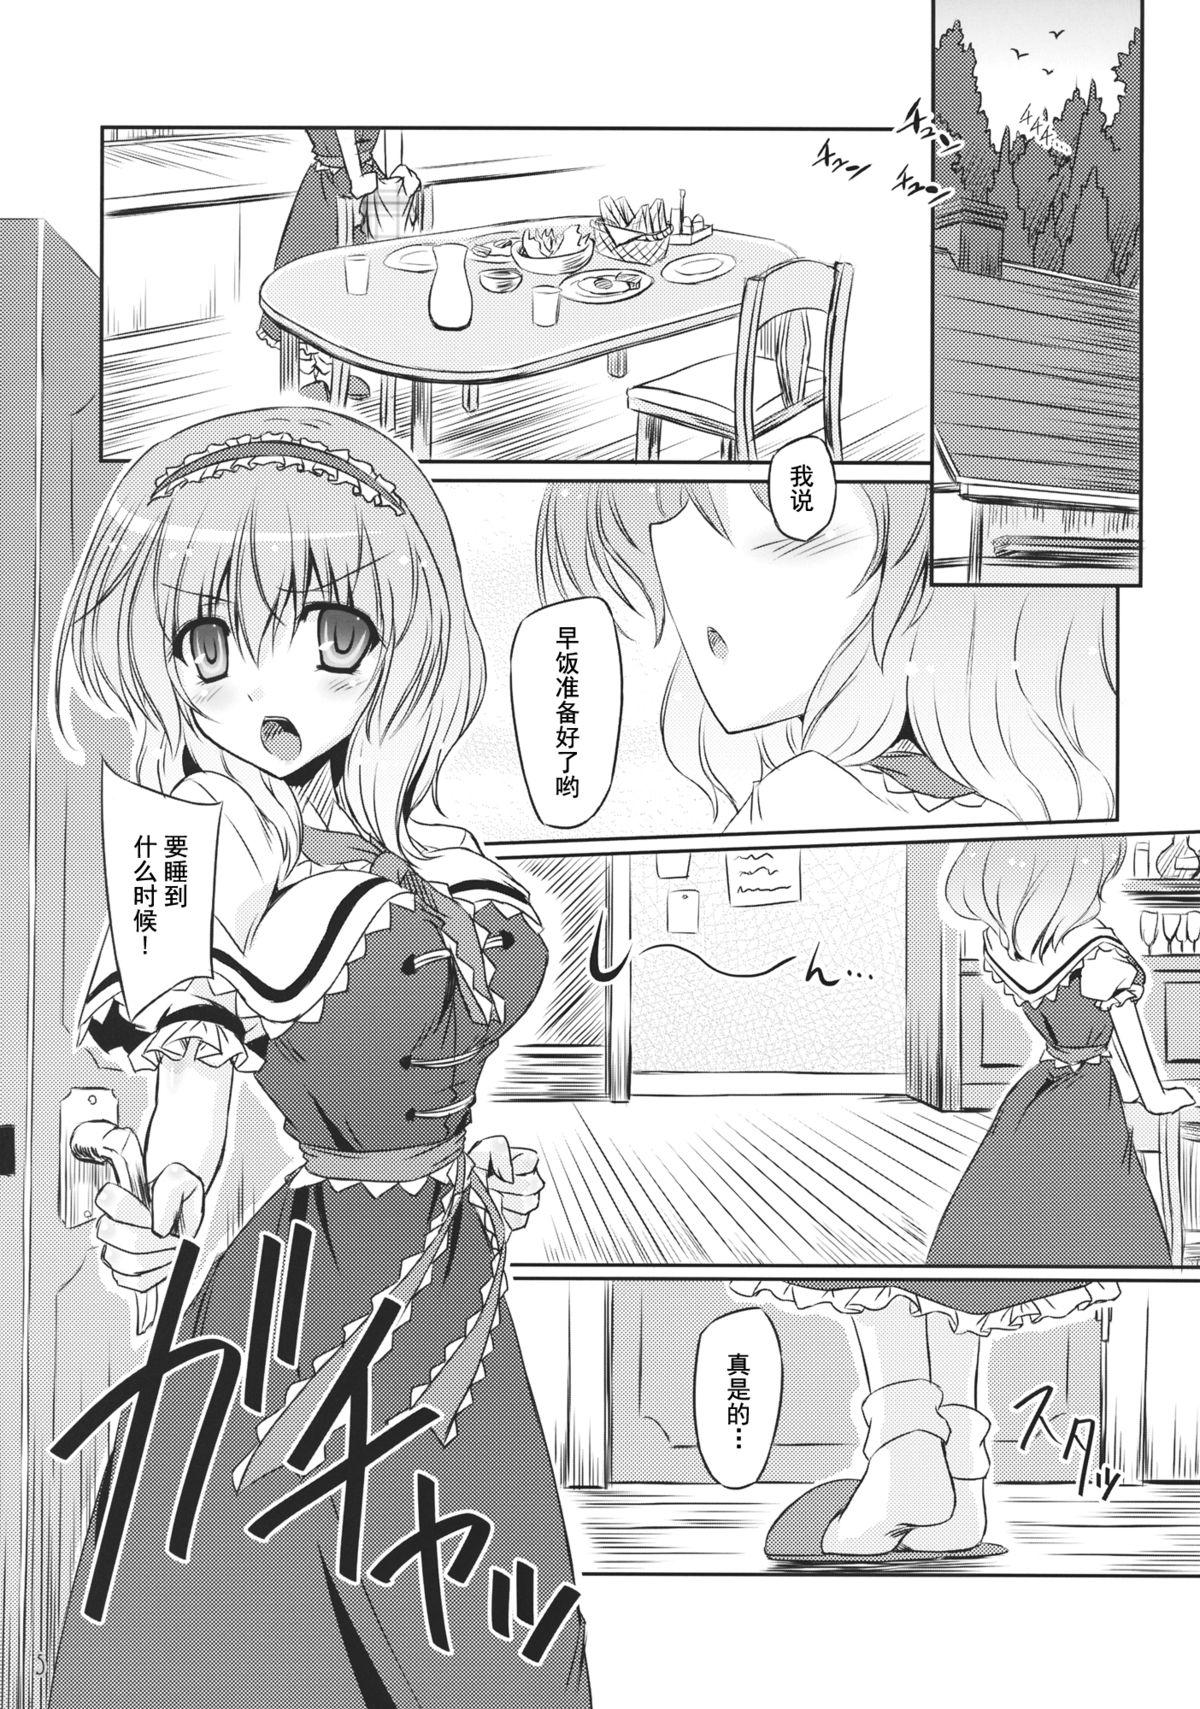 Freaky Loose Strings - Touhou project Masterbation - Page 5